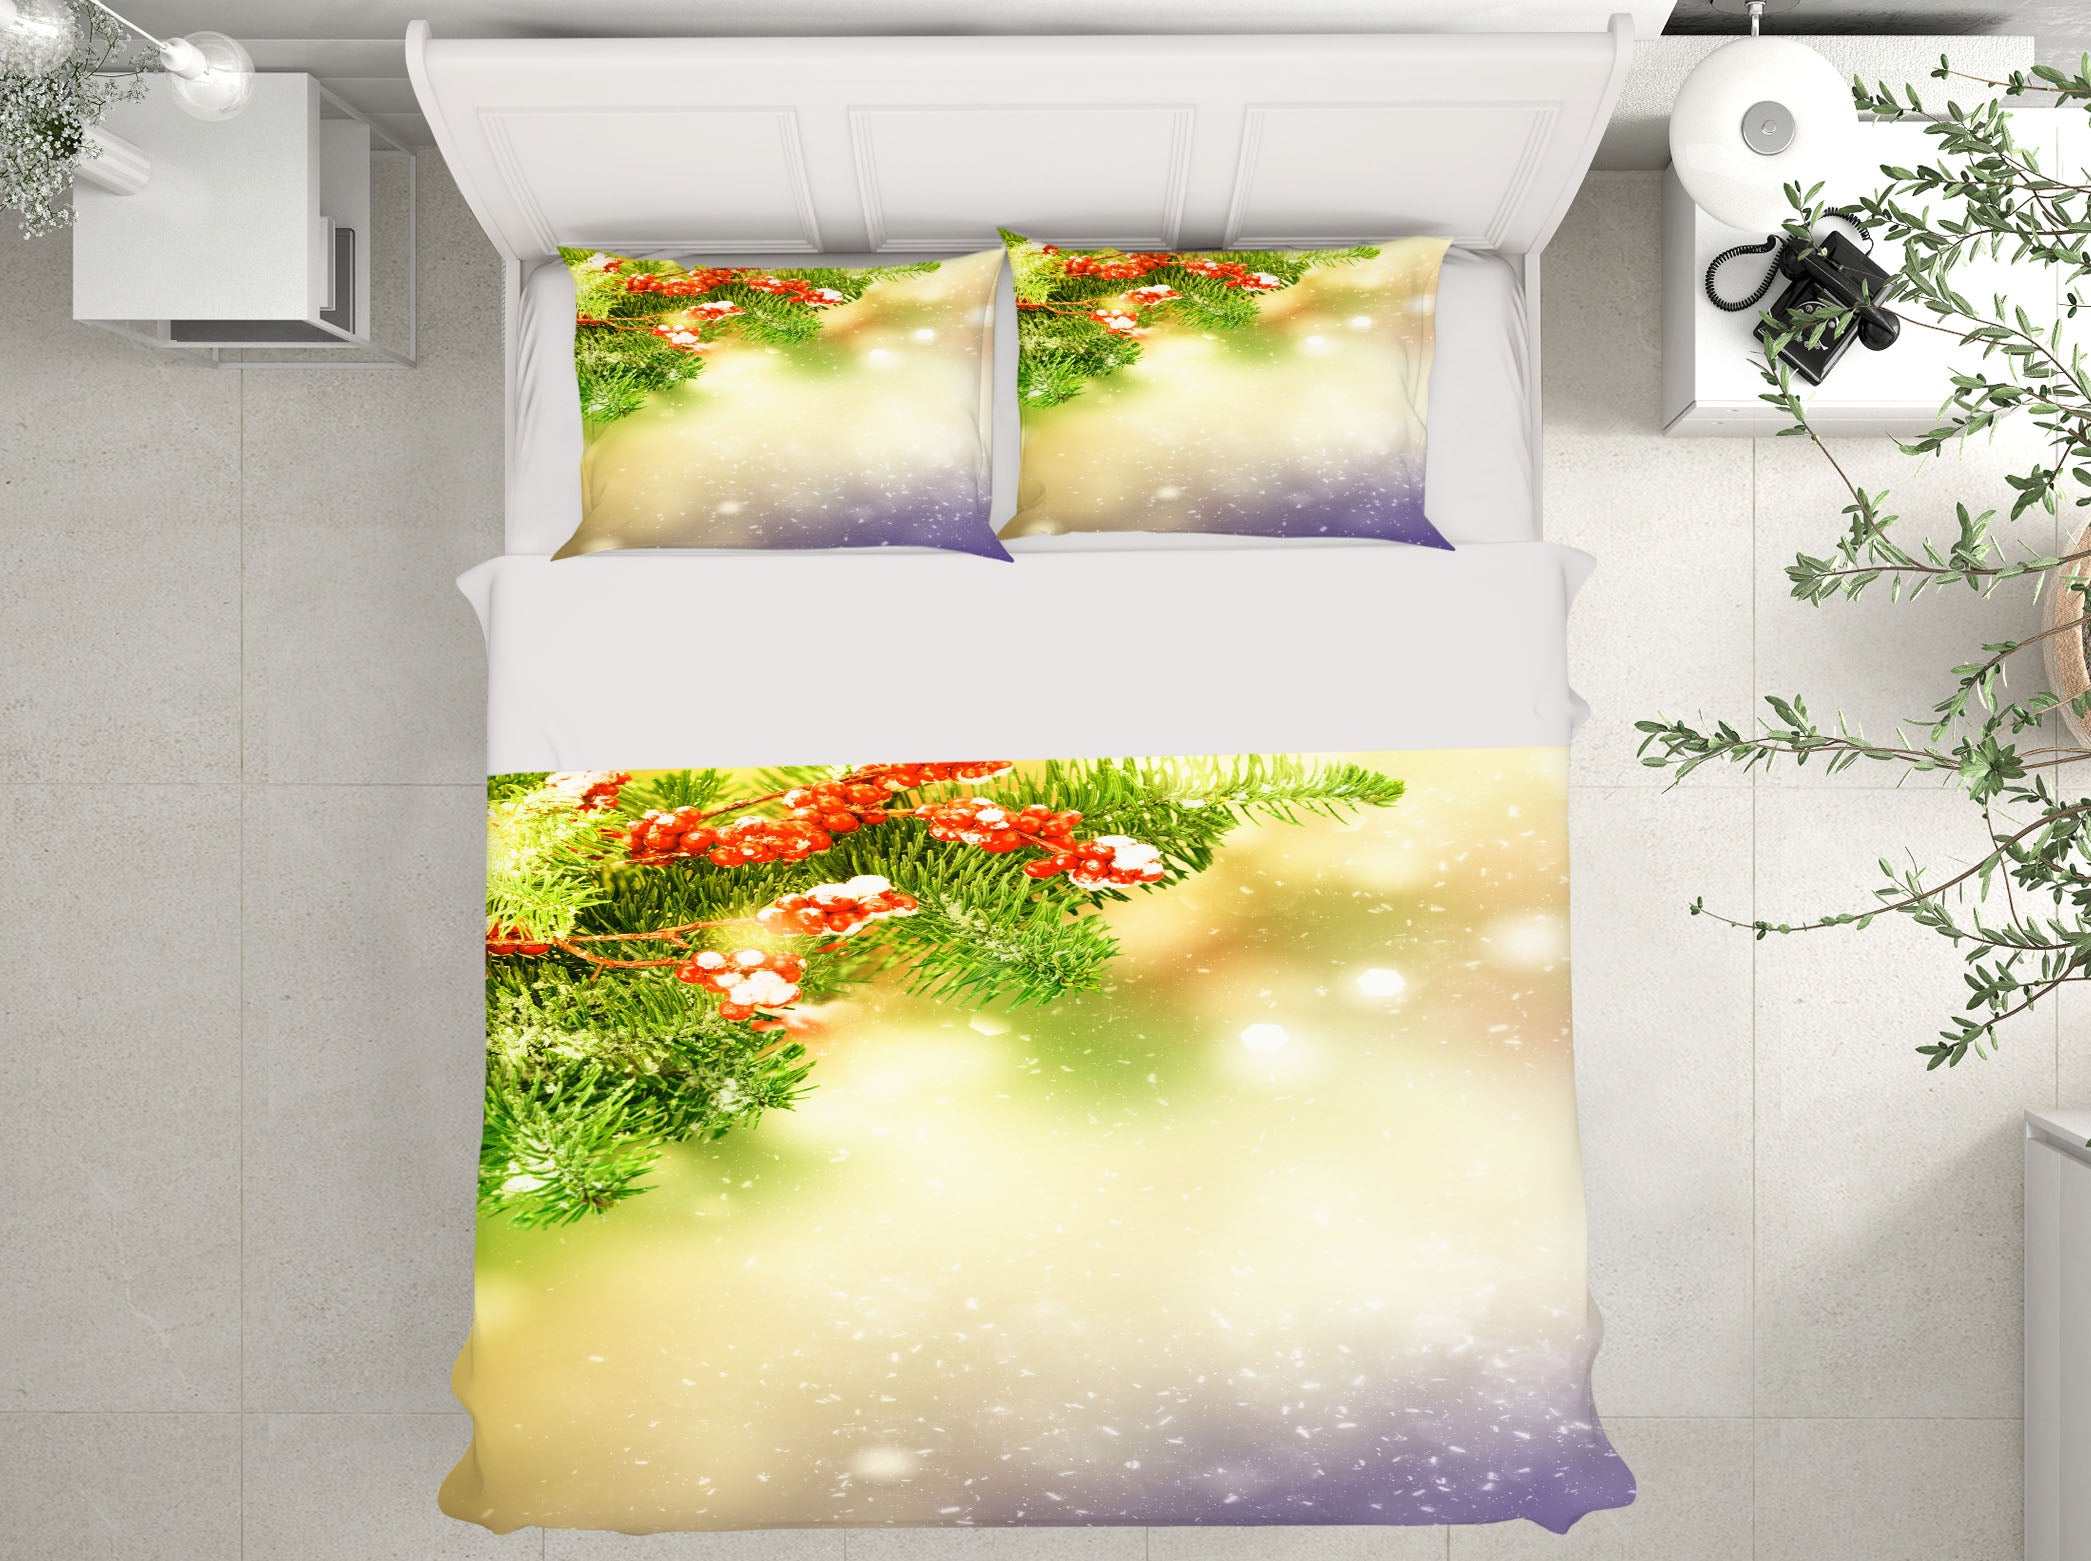 3D Branches Light 51121 Christmas Quilt Duvet Cover Xmas Bed Pillowcases